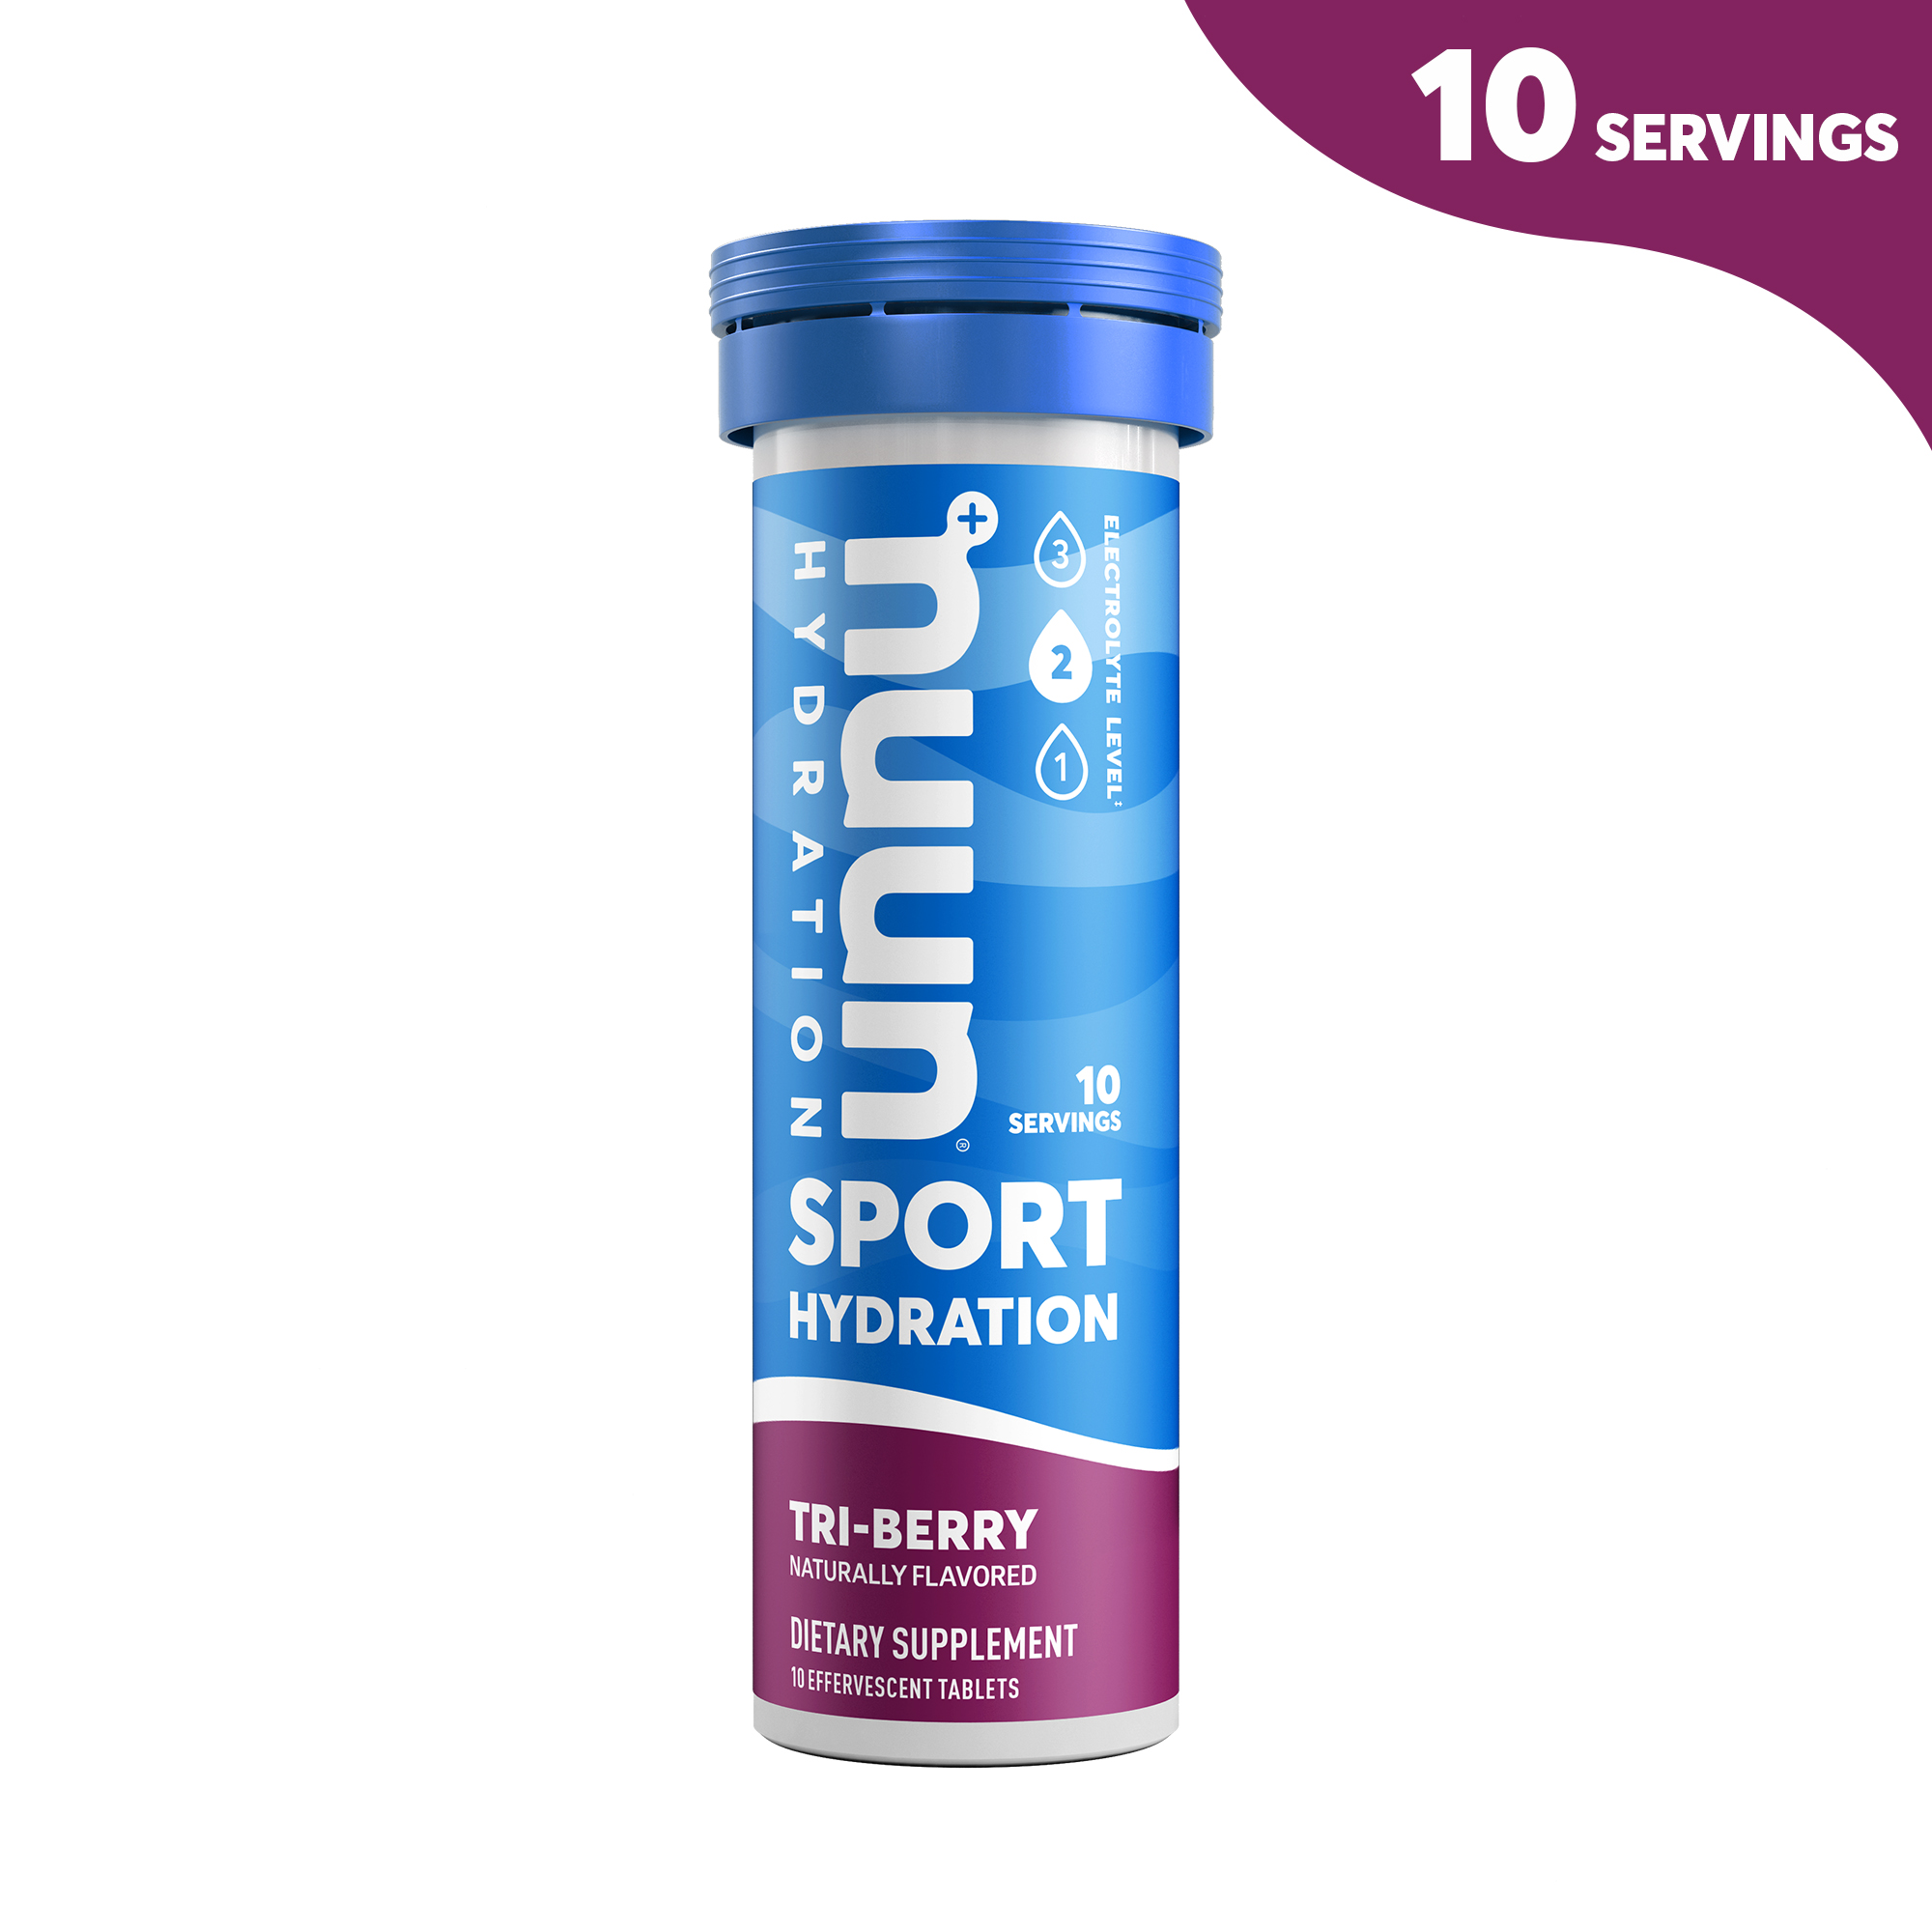 Nuun Sport Electrolyte Tablets for Proactive Hydration, Tri-Berry Tablets, 10 Count Tube - image 1 of 6